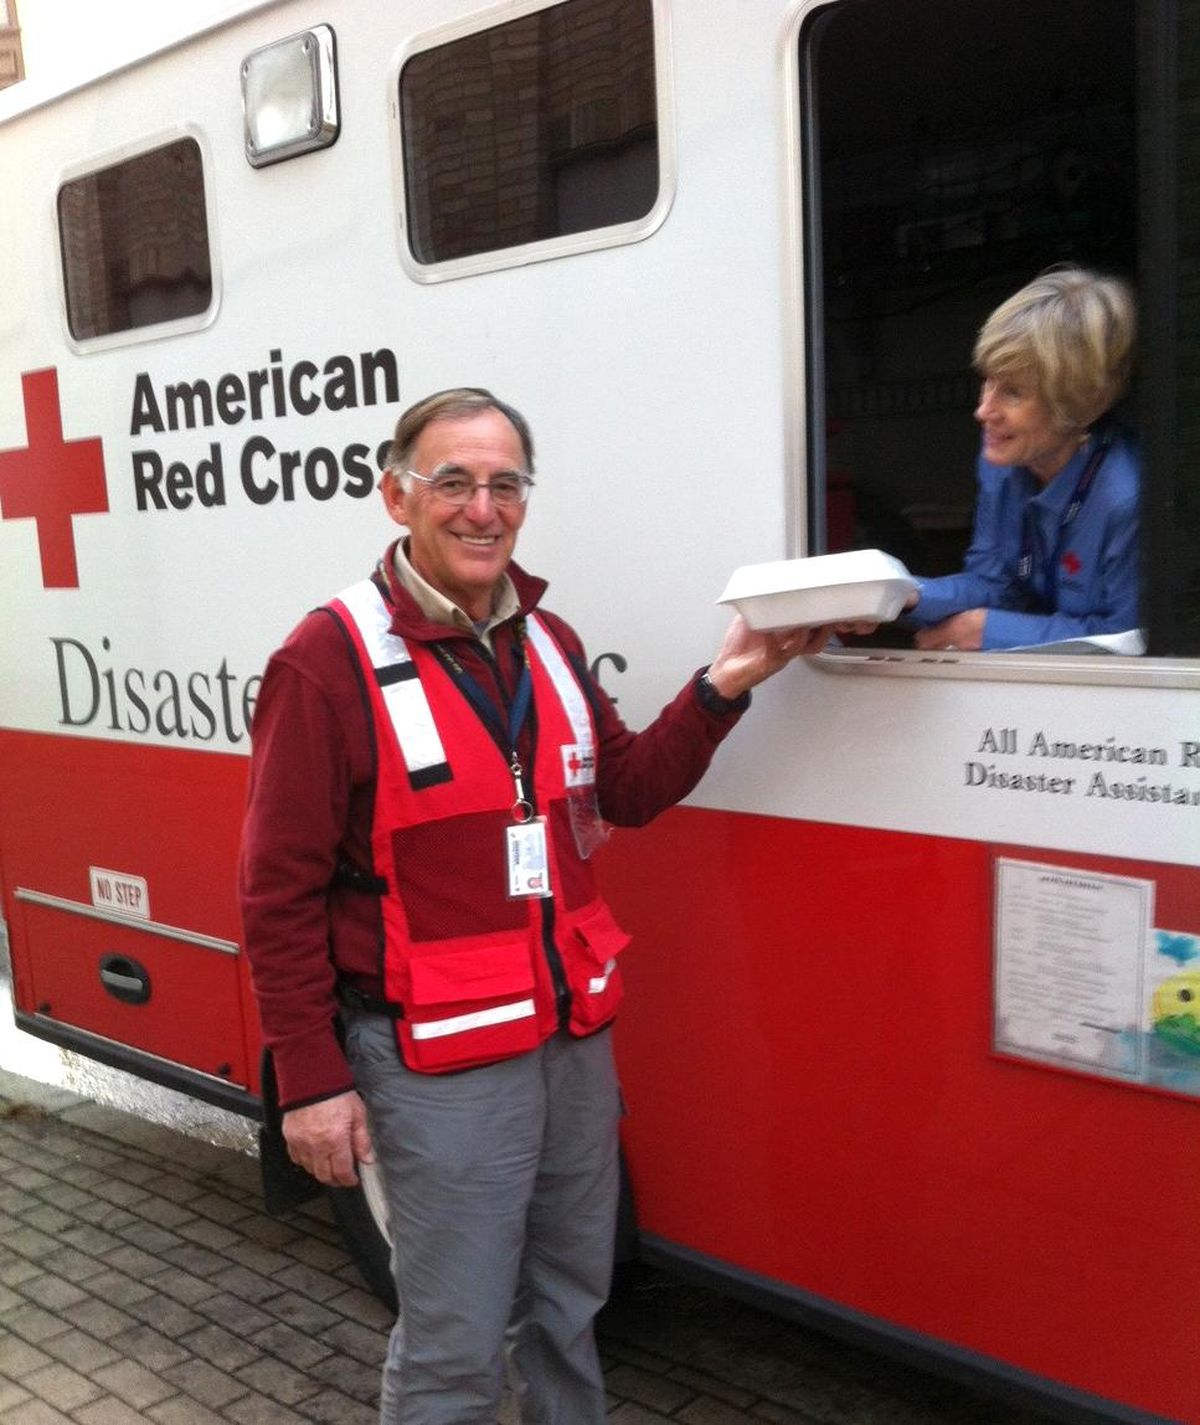 Chuck and Janet Boehme, residents of Spokane Valley, are shown on their recent volunteer trip to North Carolina to help with flooding there. The couple donates their time to the Red Cross and often volunteer to travel to large regional disasters. (Courtesy of Chuck and Janet Boeh / SR)